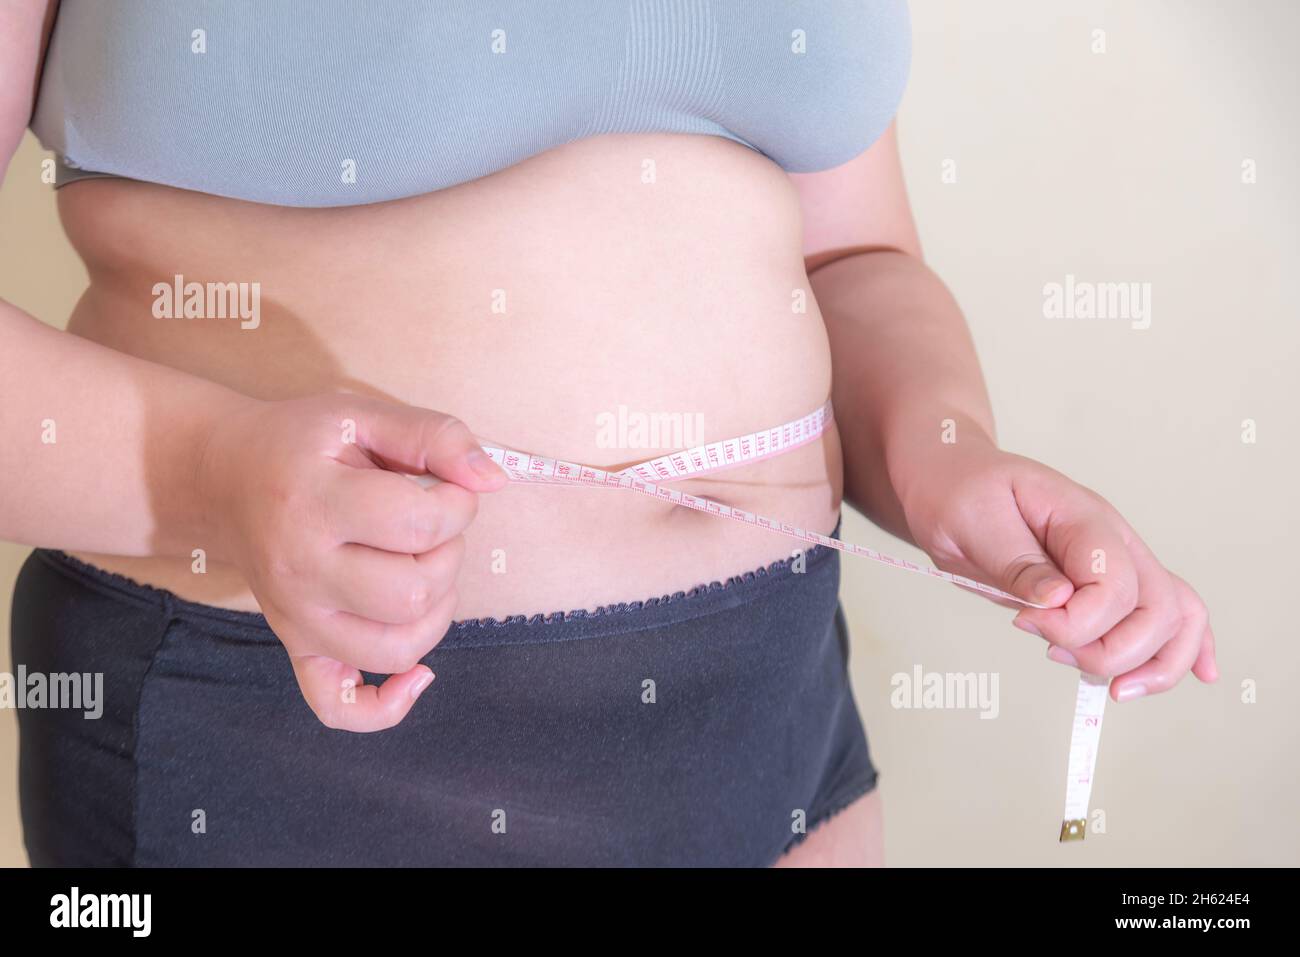 Fat women., Belly women Overweight, Shape up healthy stomach muscle, and diet lifestyle, to reduce belly concept. Stock Photo